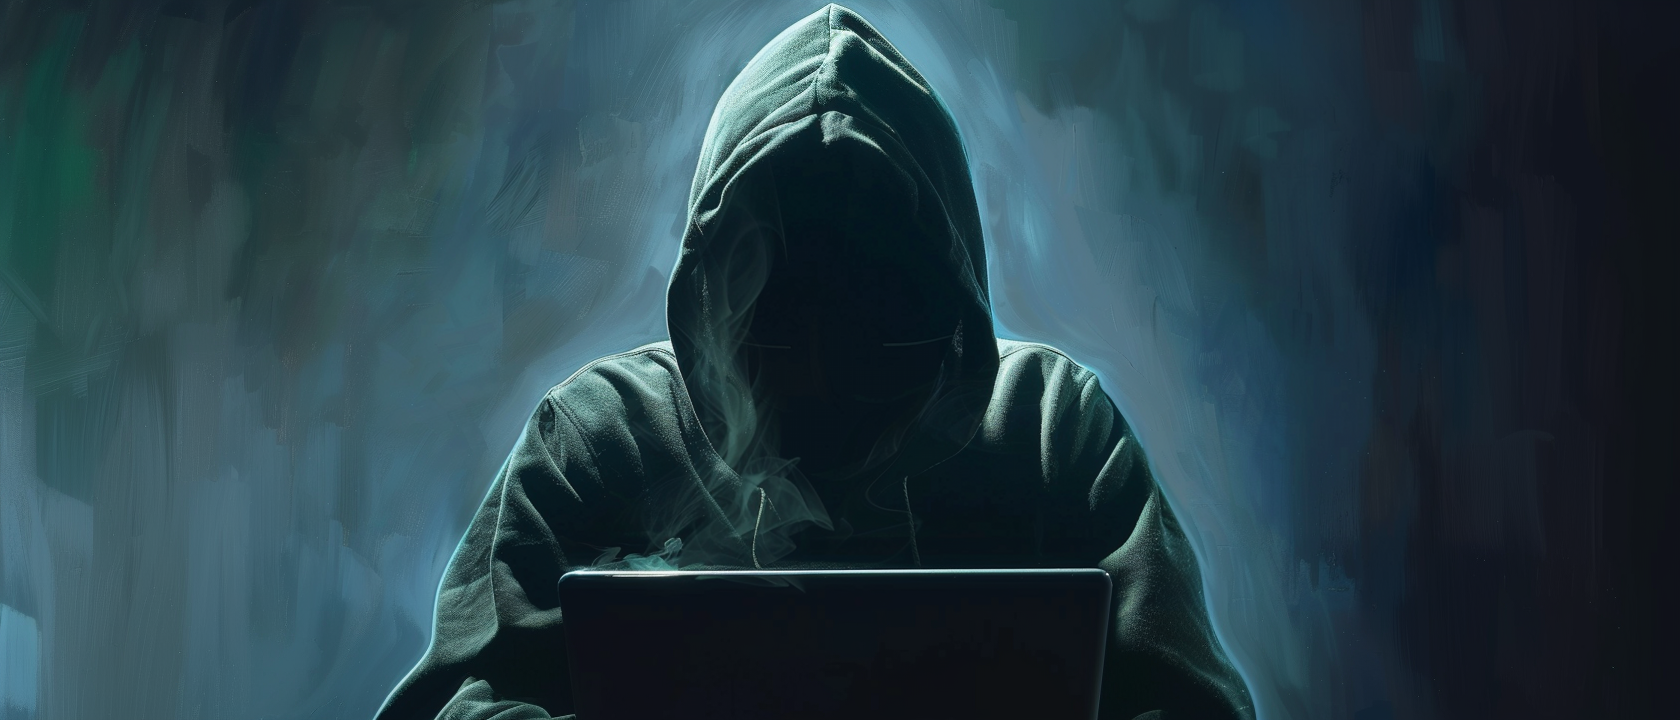 DMM Bitcoin Hit by Major Hack, Loses $305 Million in Bitcoin